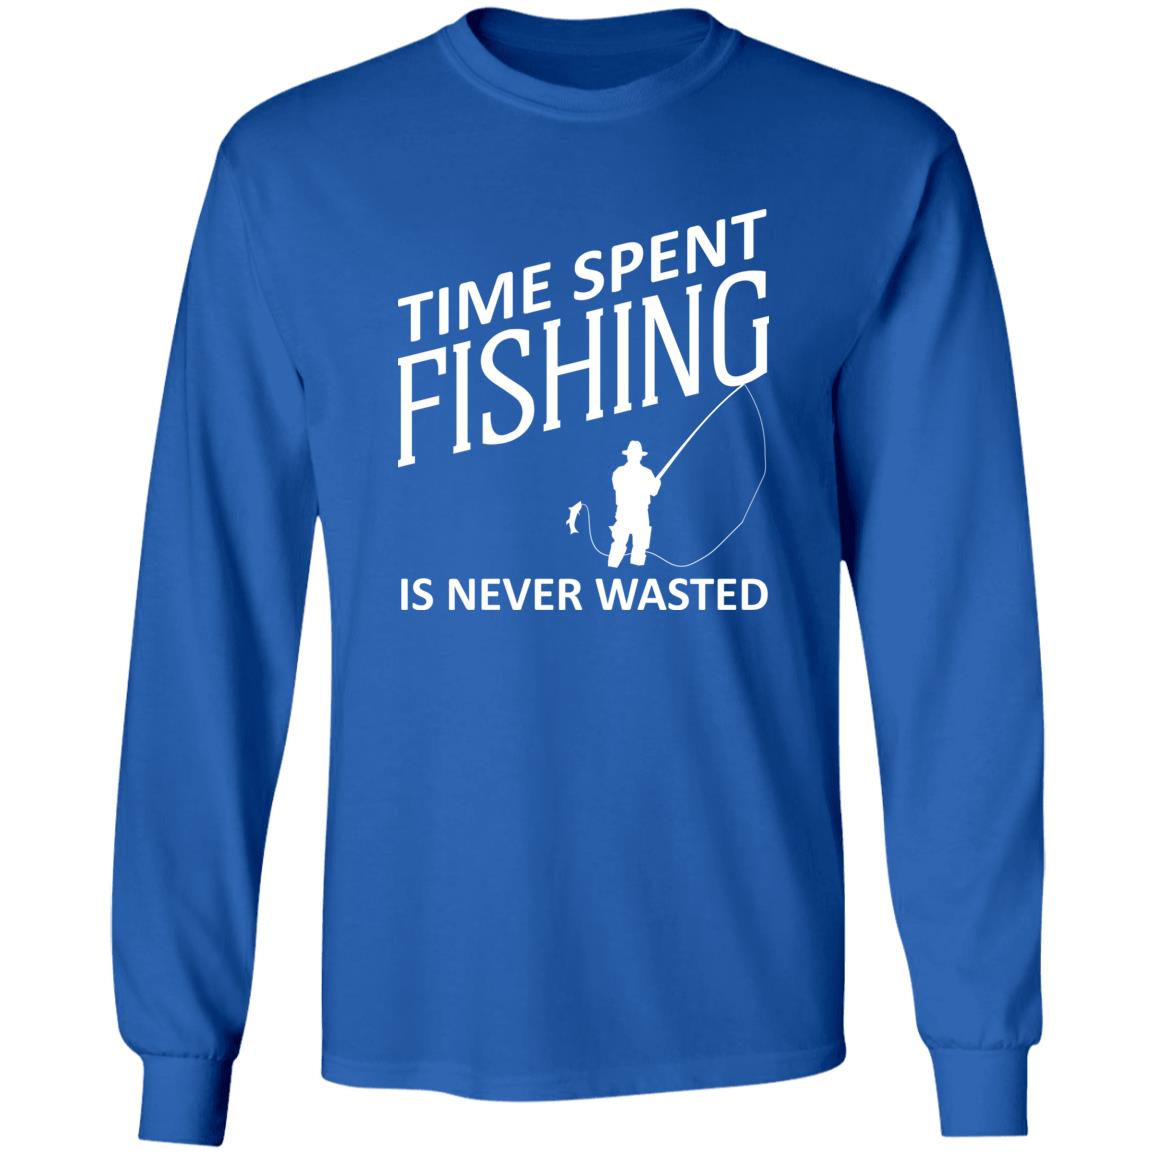 Time Spent Fishing is never wasted Long Sleeve T-Shirt w royal